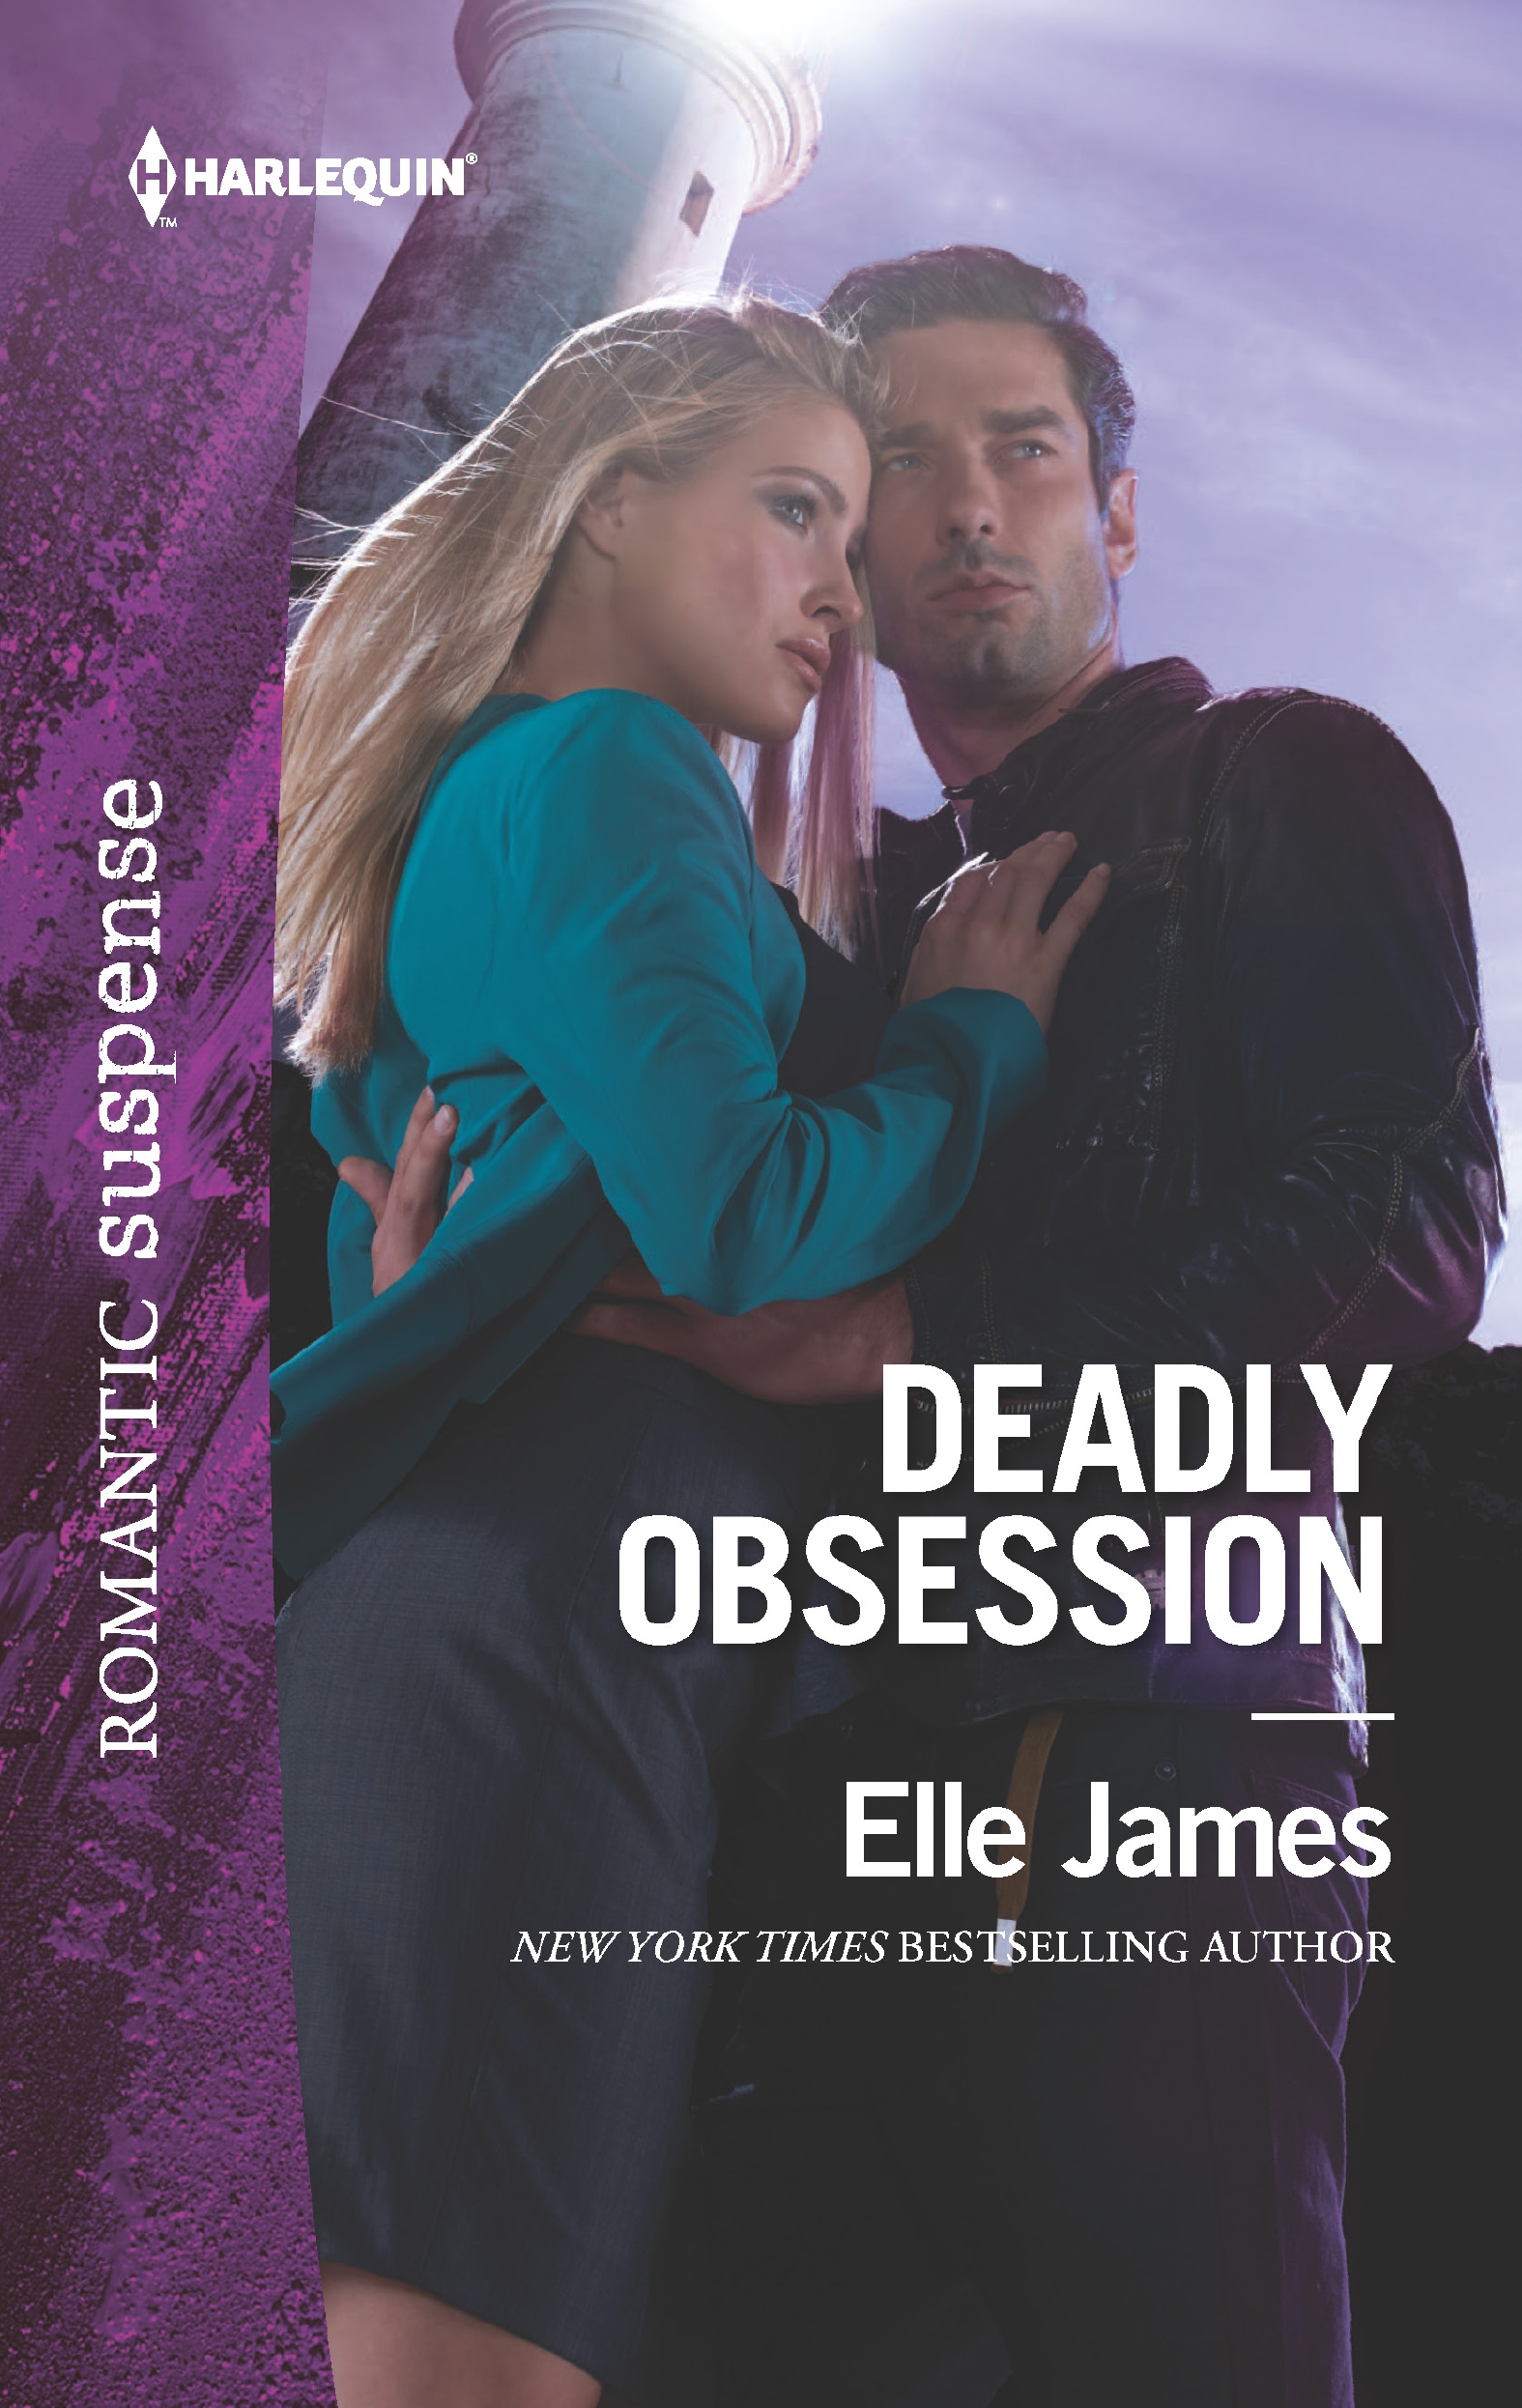 Deadly Obsession (2016) by Elle James